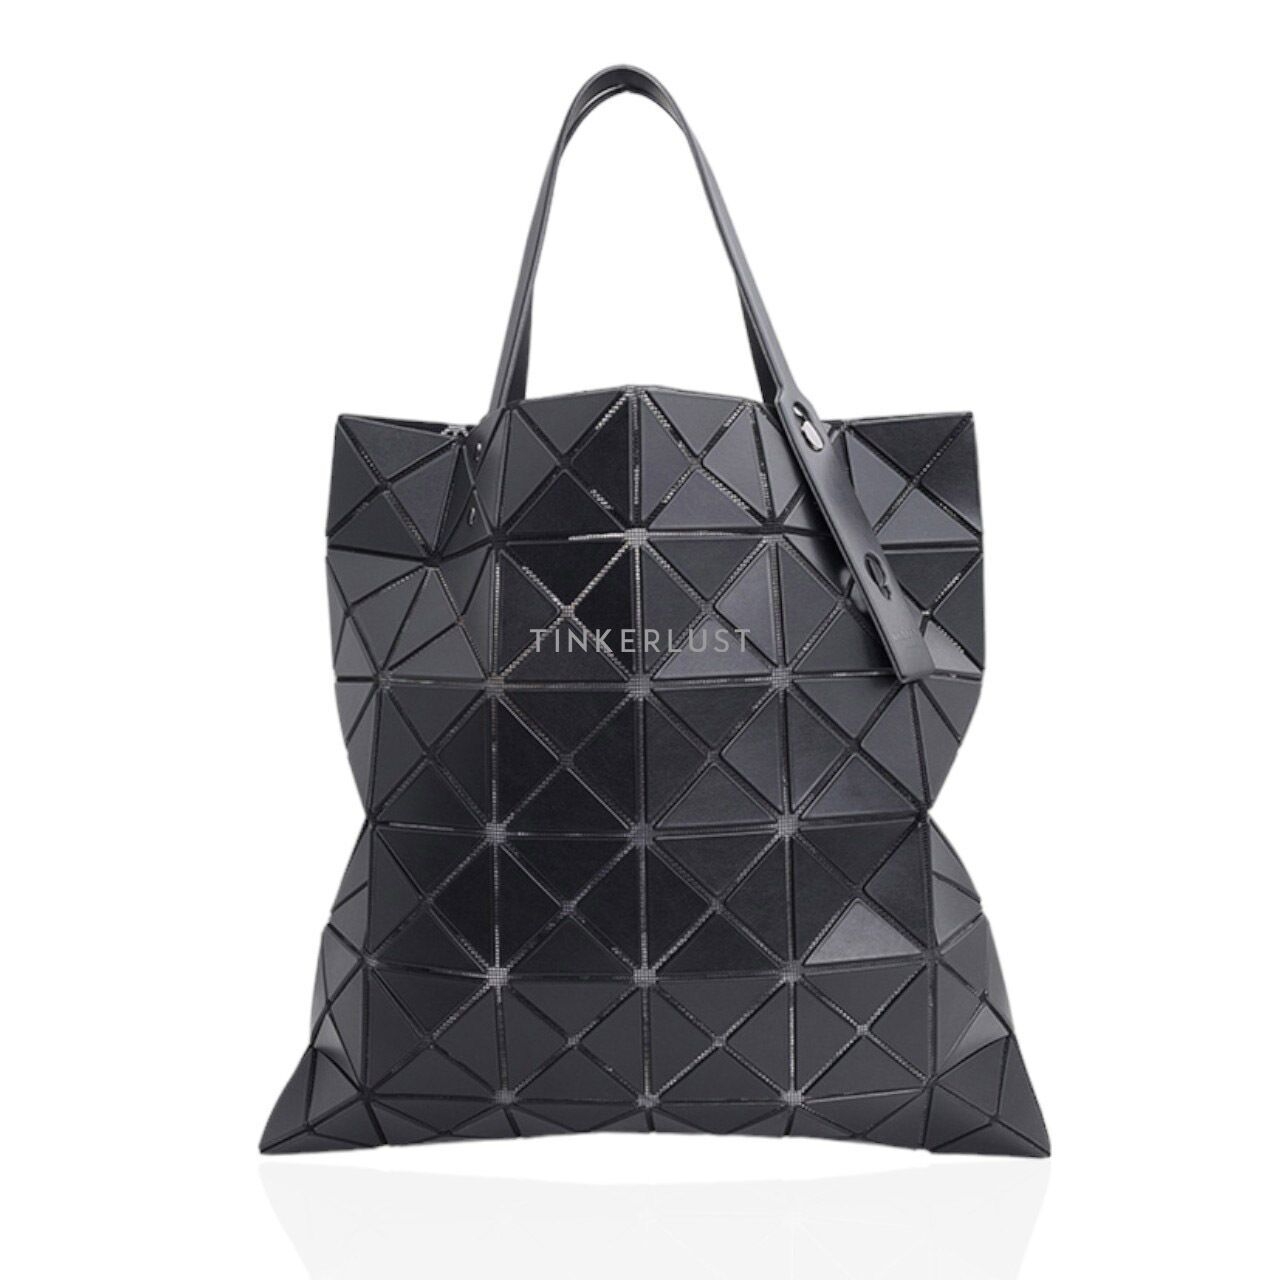 Bao Bao Issey Miyake Lucent Solid Tote Bag in Black